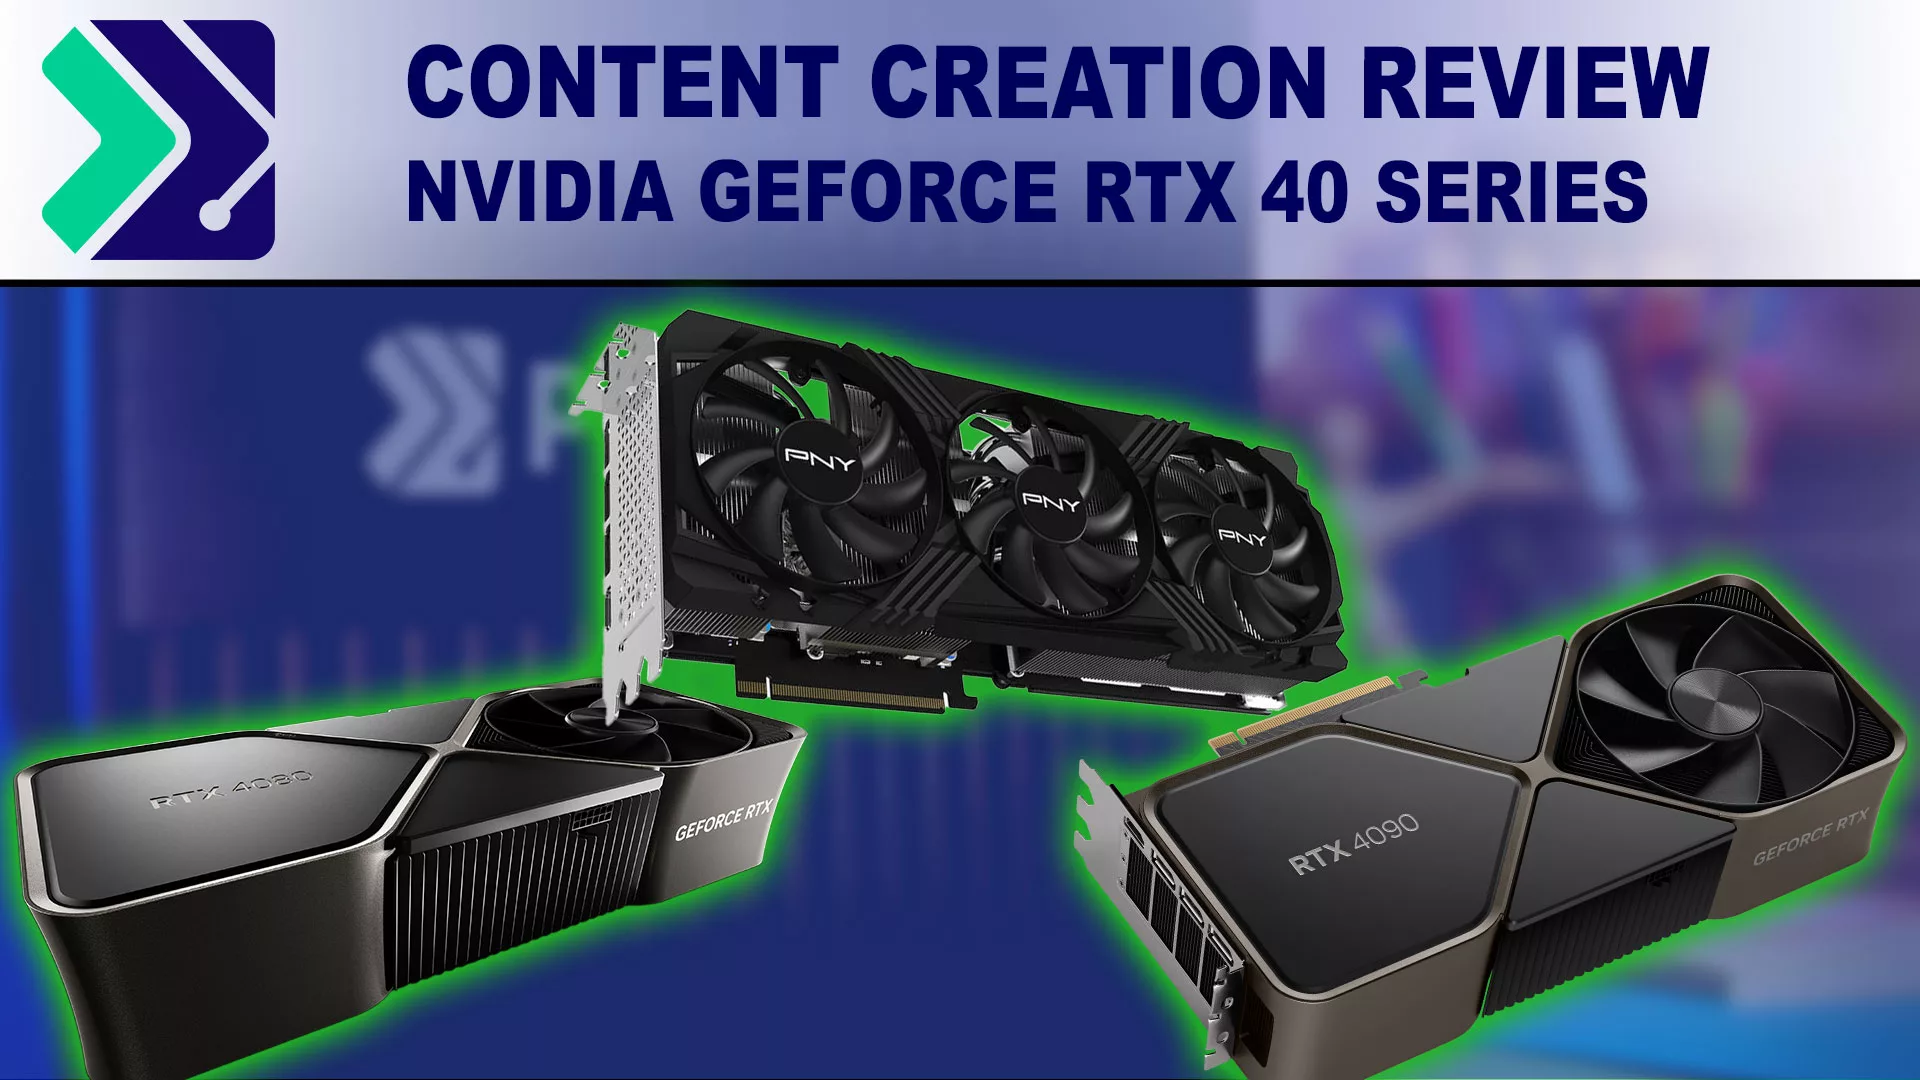 NVIDIA GeForce RTX 40 Series Content Creation Review